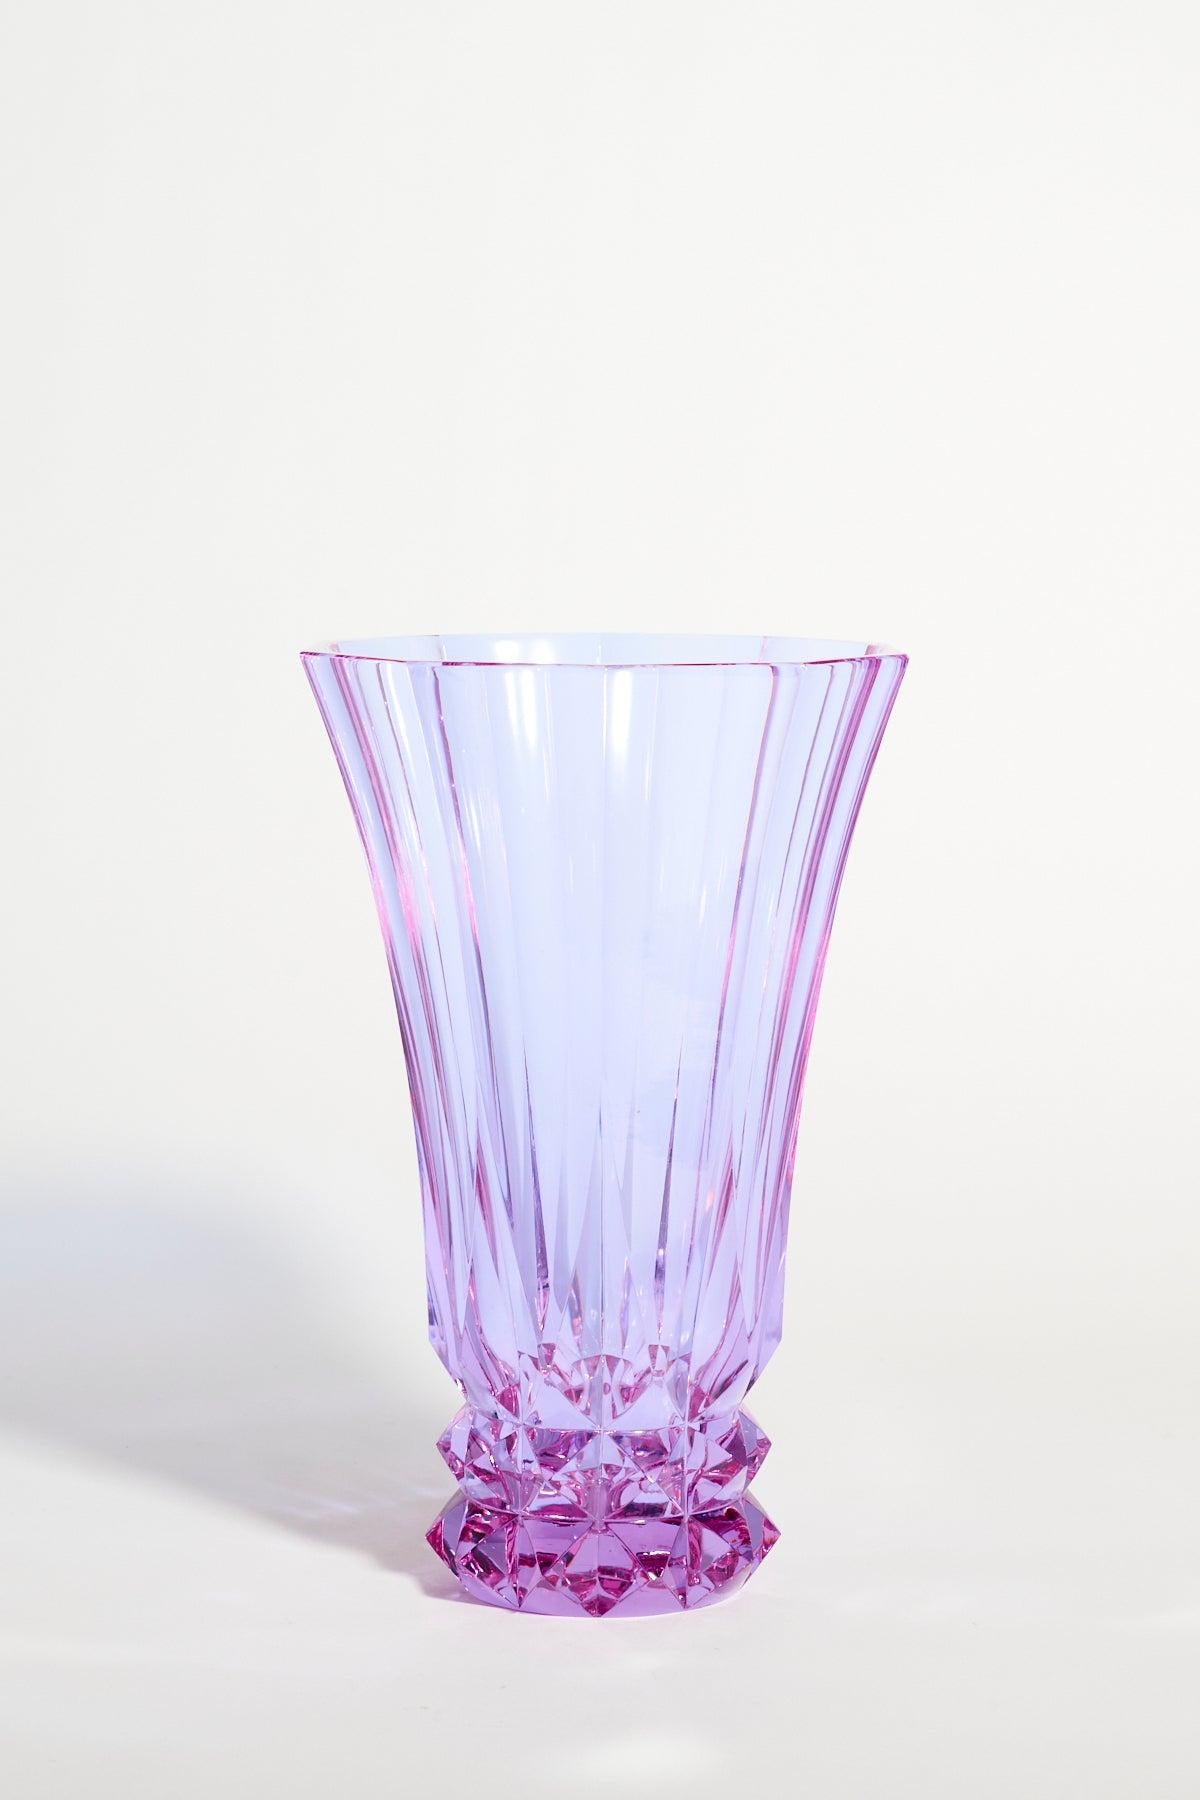 Heavy Alexandrite glass vase with fluted body and deeply cut geometric pattern to the base, showing colors of pink, lilac and blue according to the light source.